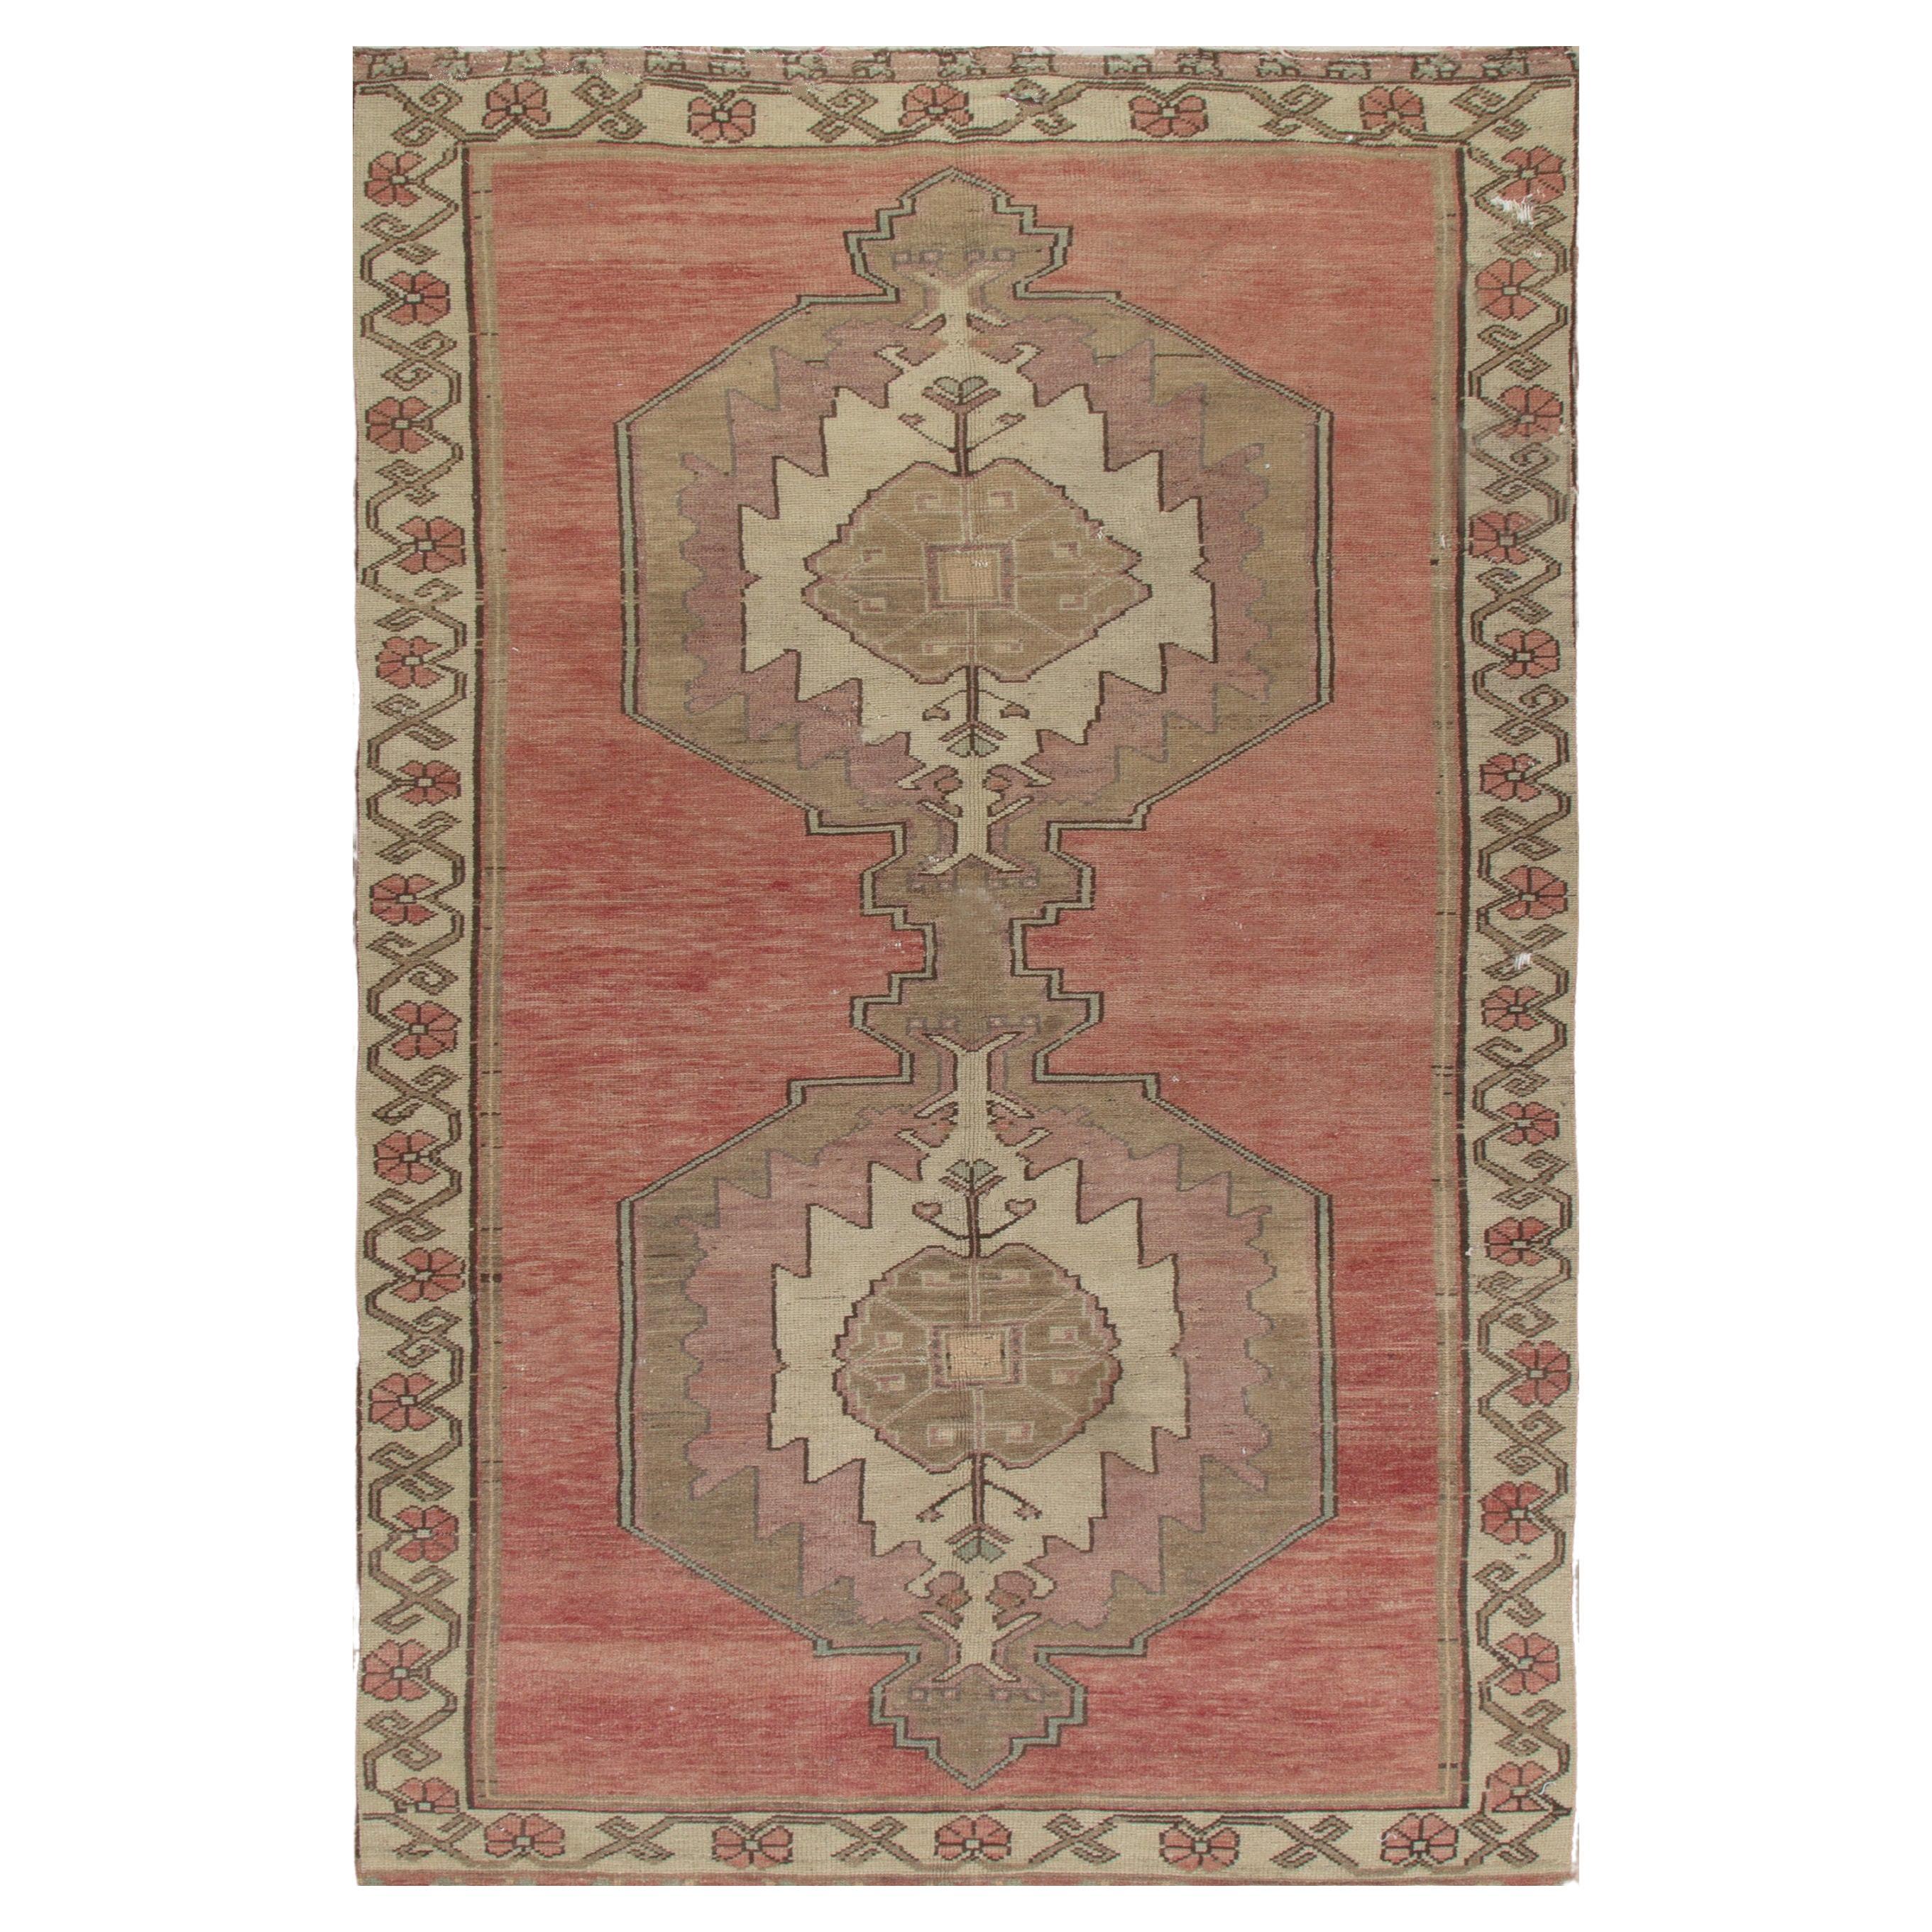 4.2x9 ft Vintage Handmade Turkish Wool Rug in Soft Red, Brown and Beige Colors